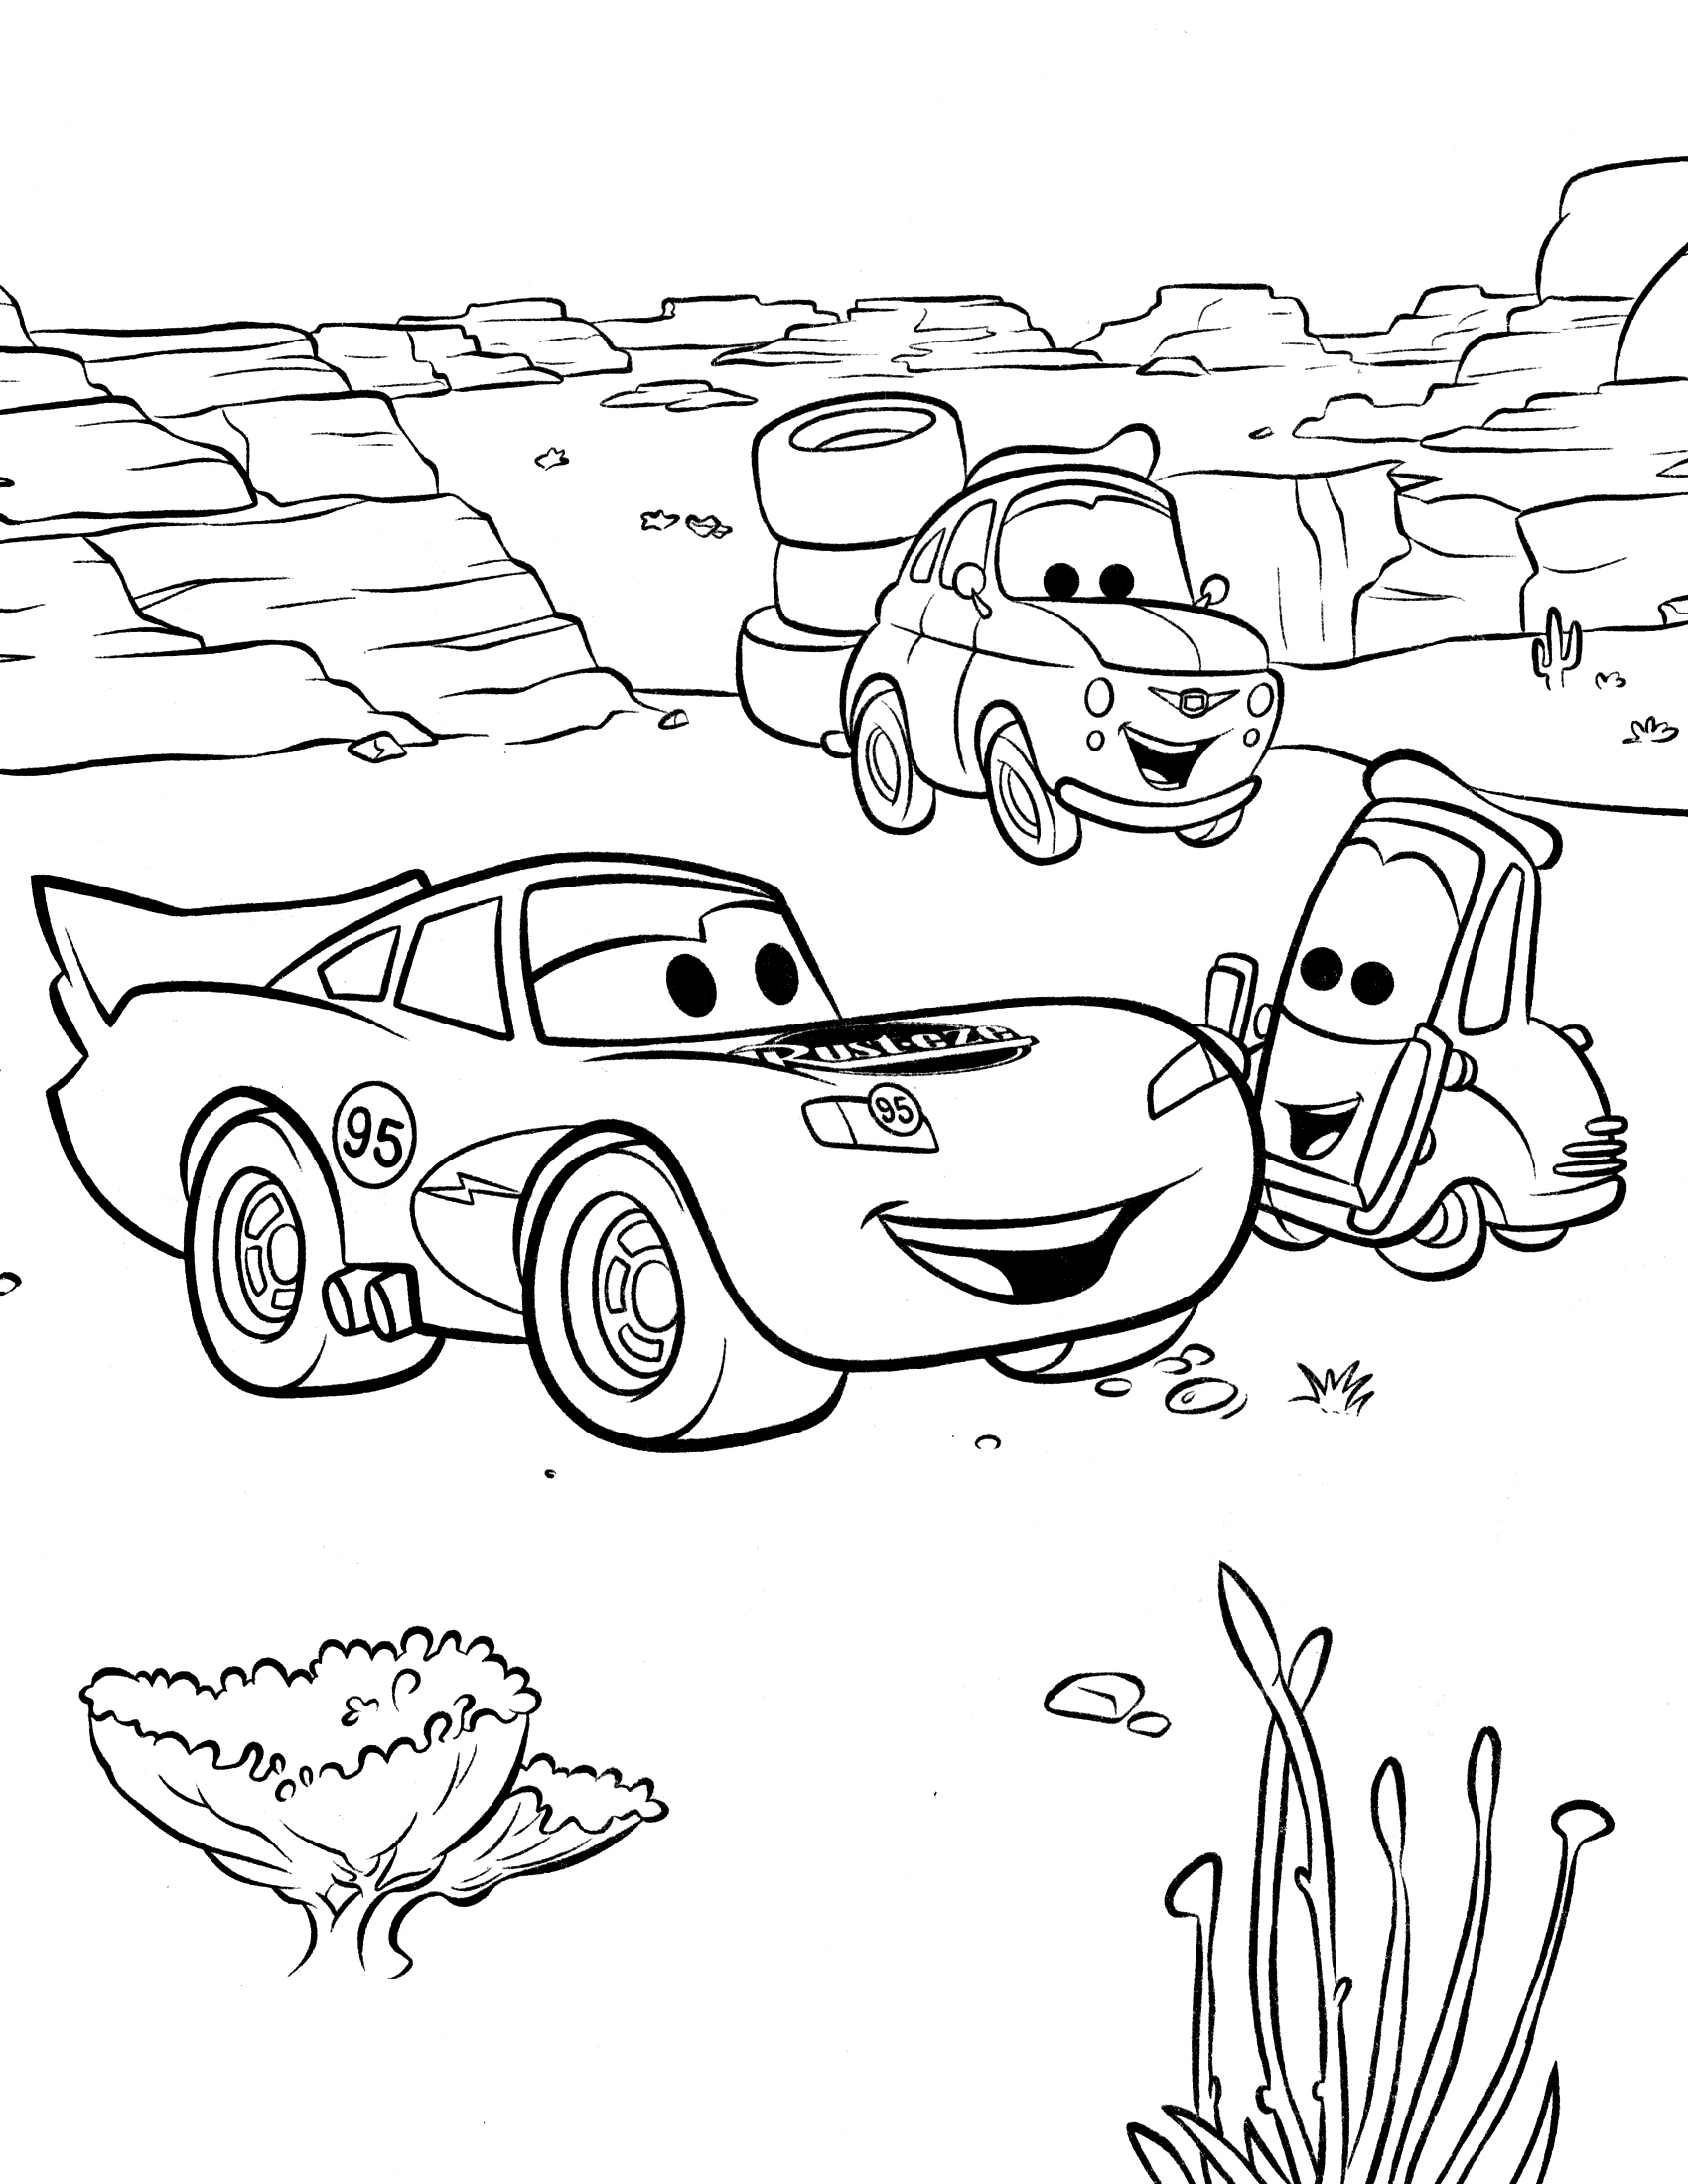 Cars 3 Coloring Pages at GetColorings.com | Free printable ...